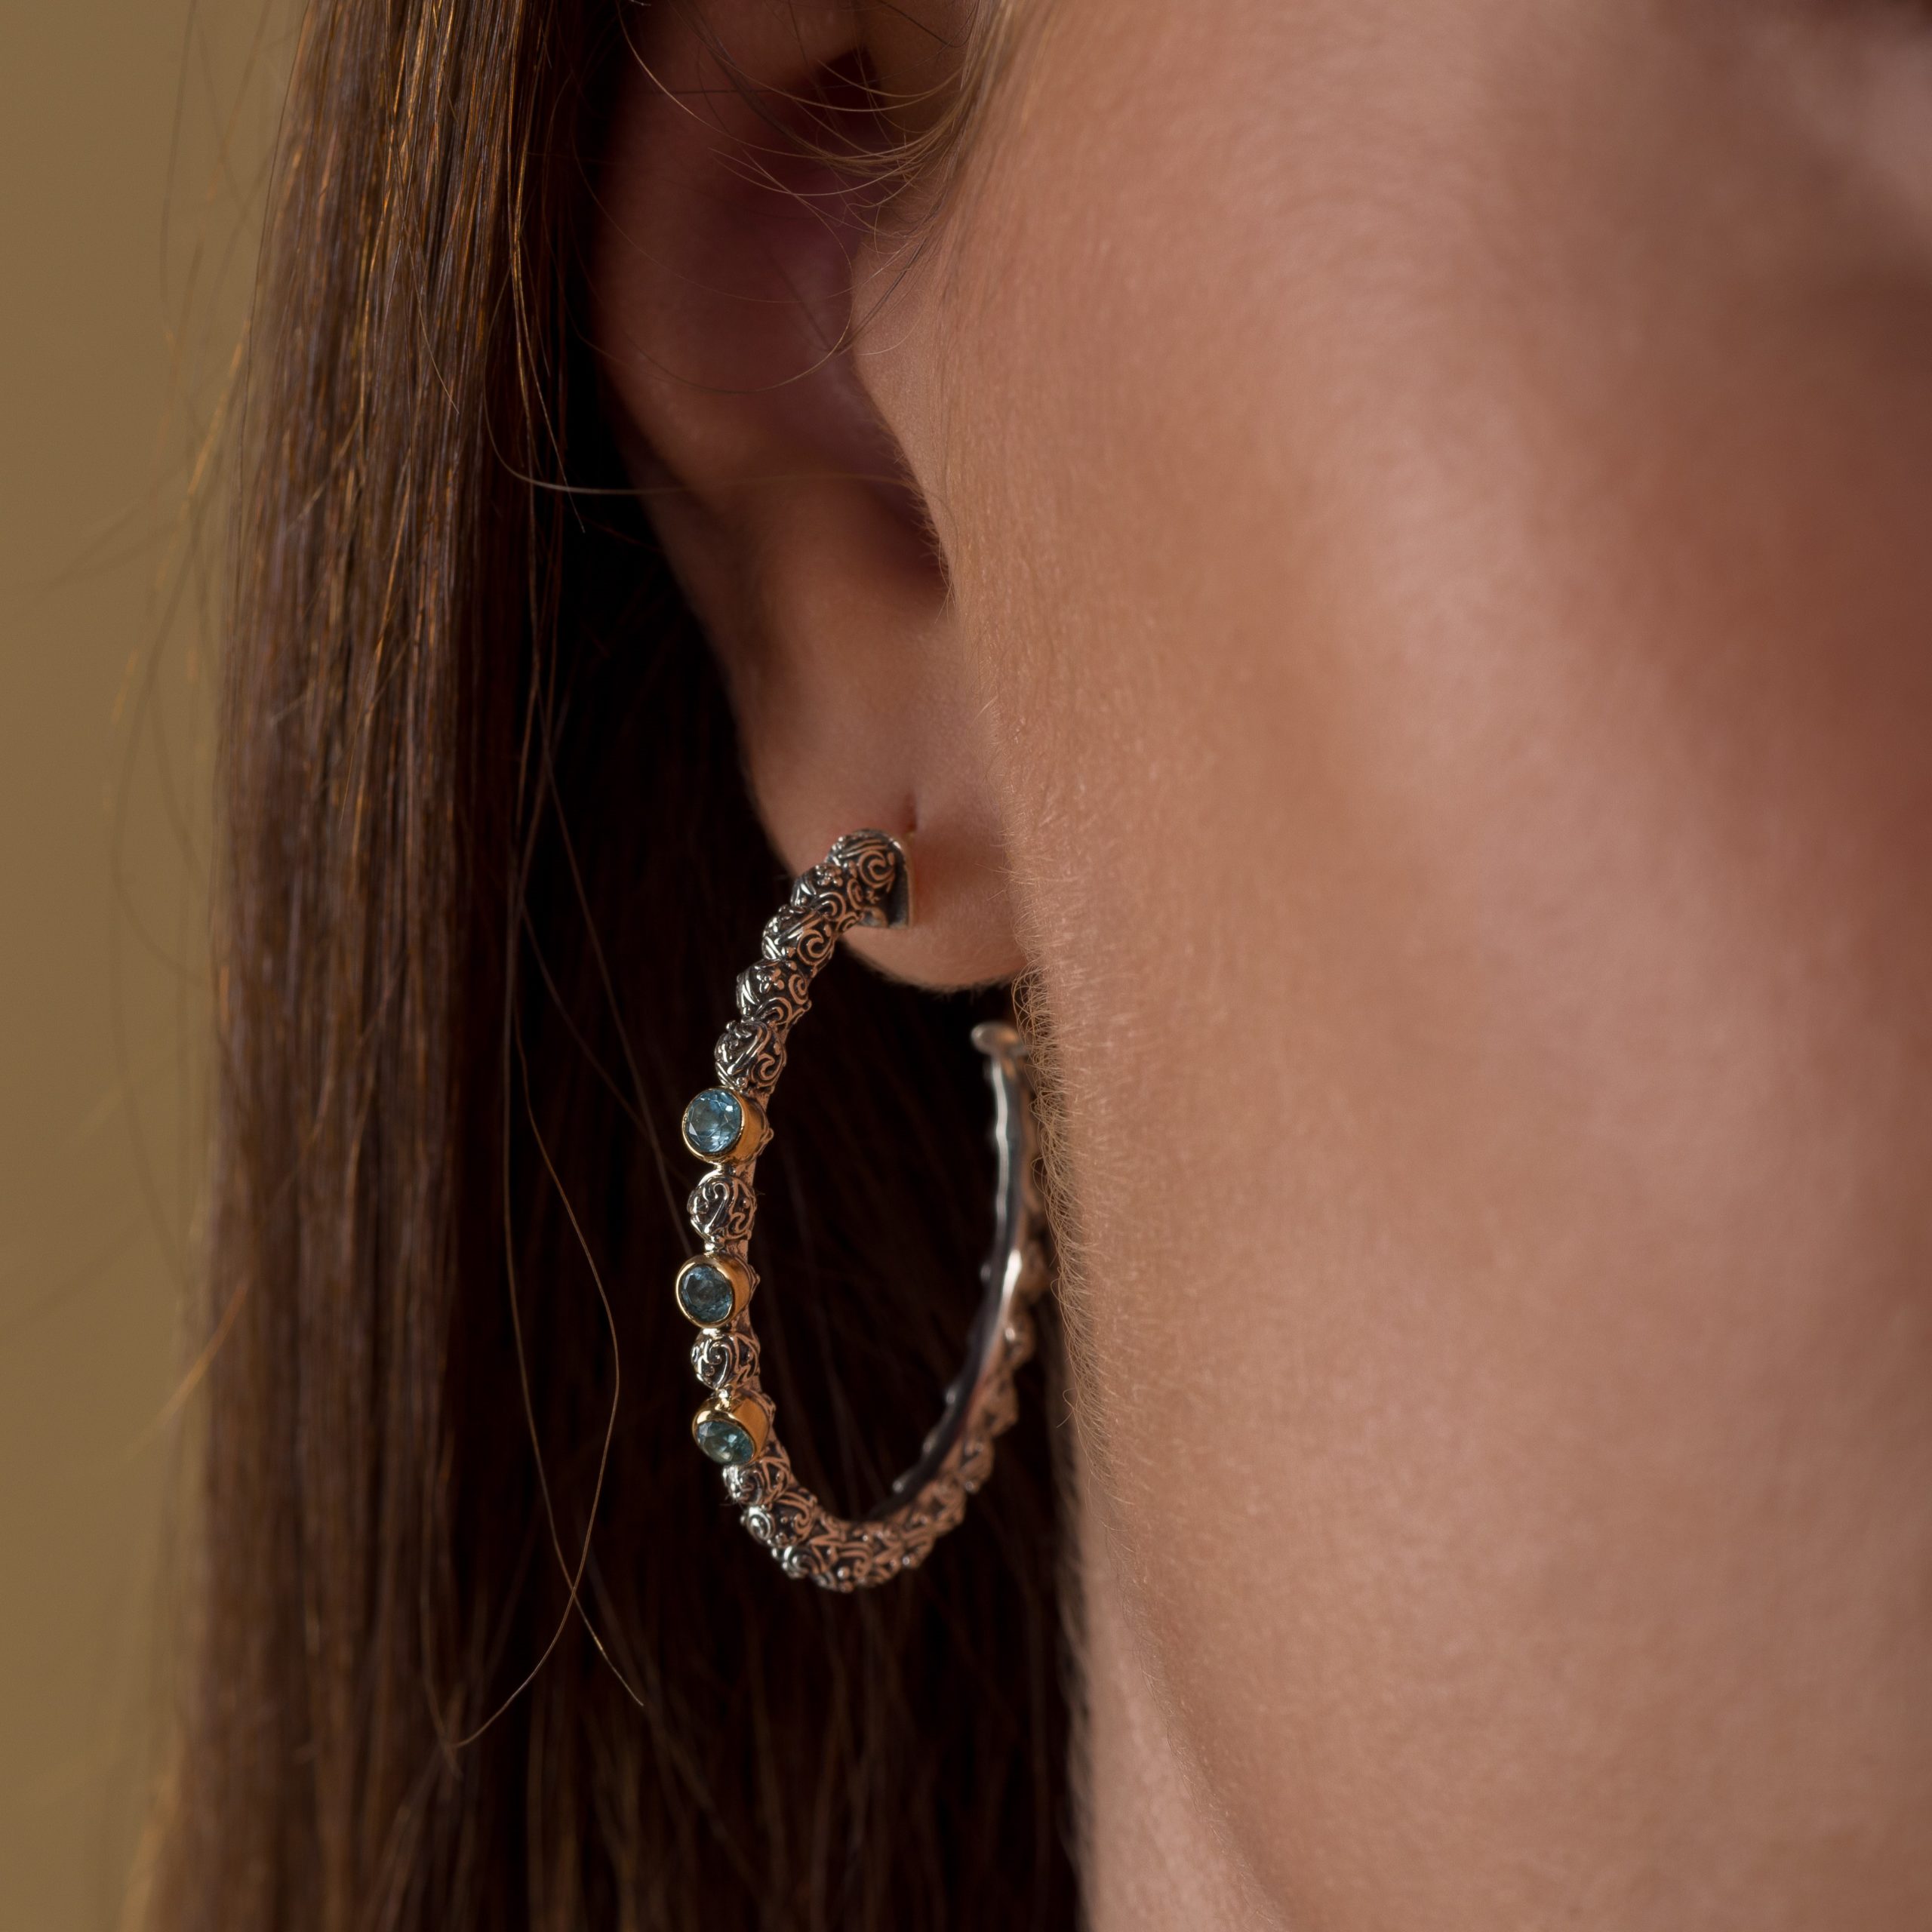 Eve hoops Earrings in 18K Gold and Sterling silver with Gemstones